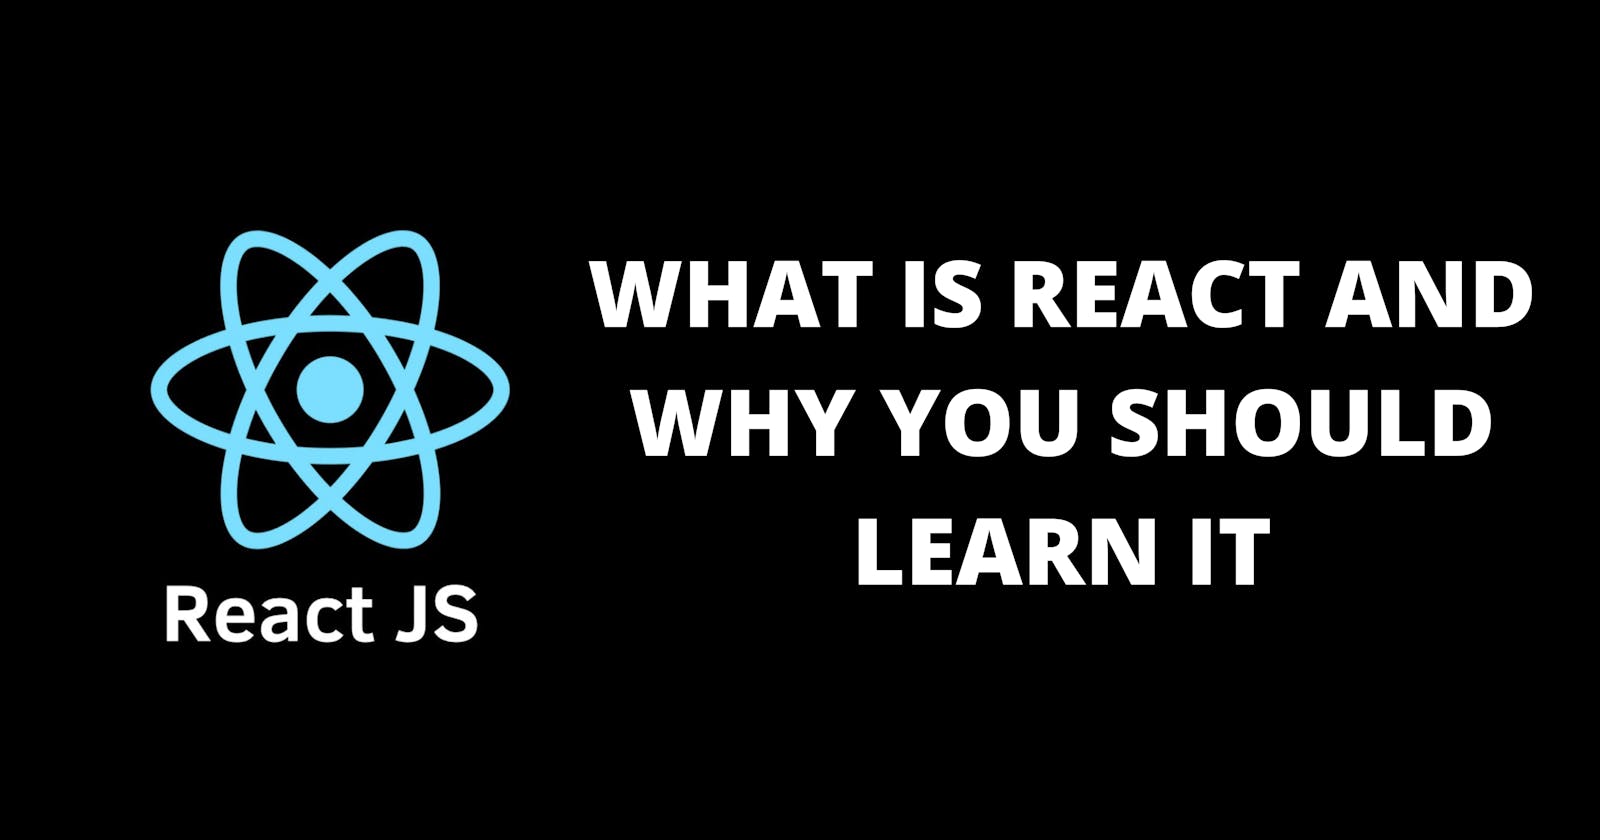 What is React and why should you learn it